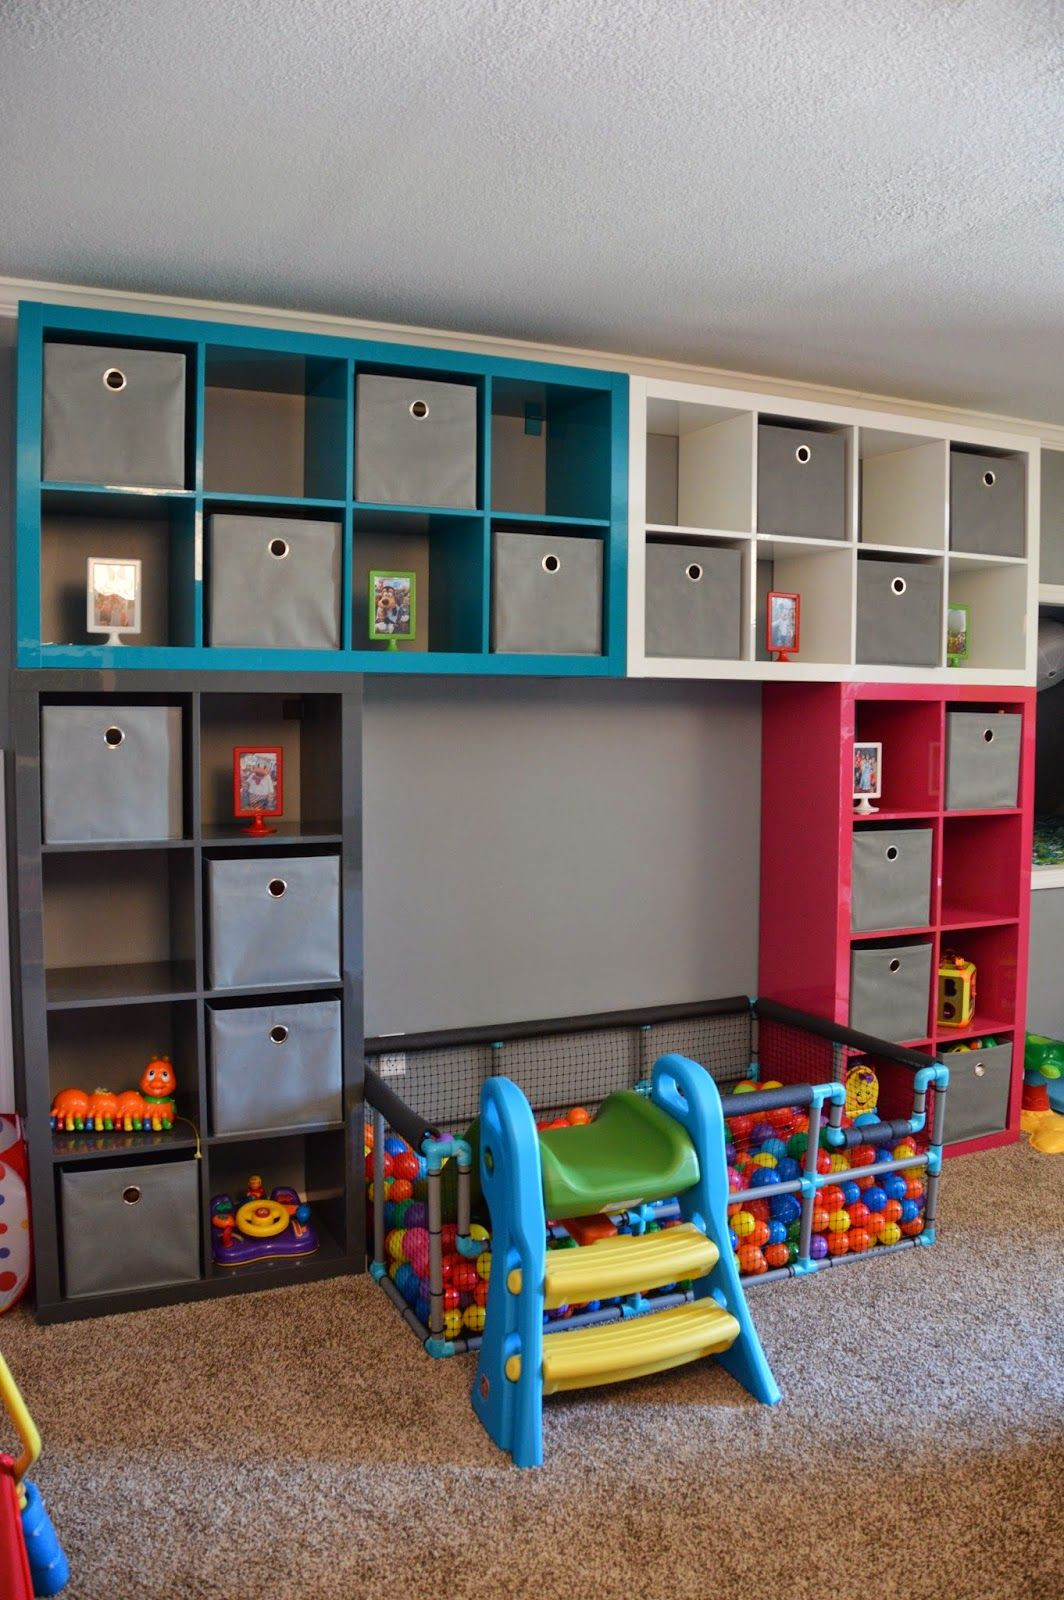 Diy Storage Ideas For Kids Rooms
 7 1 Toy Storage Ideas DIY Plans In A Small Space [Your